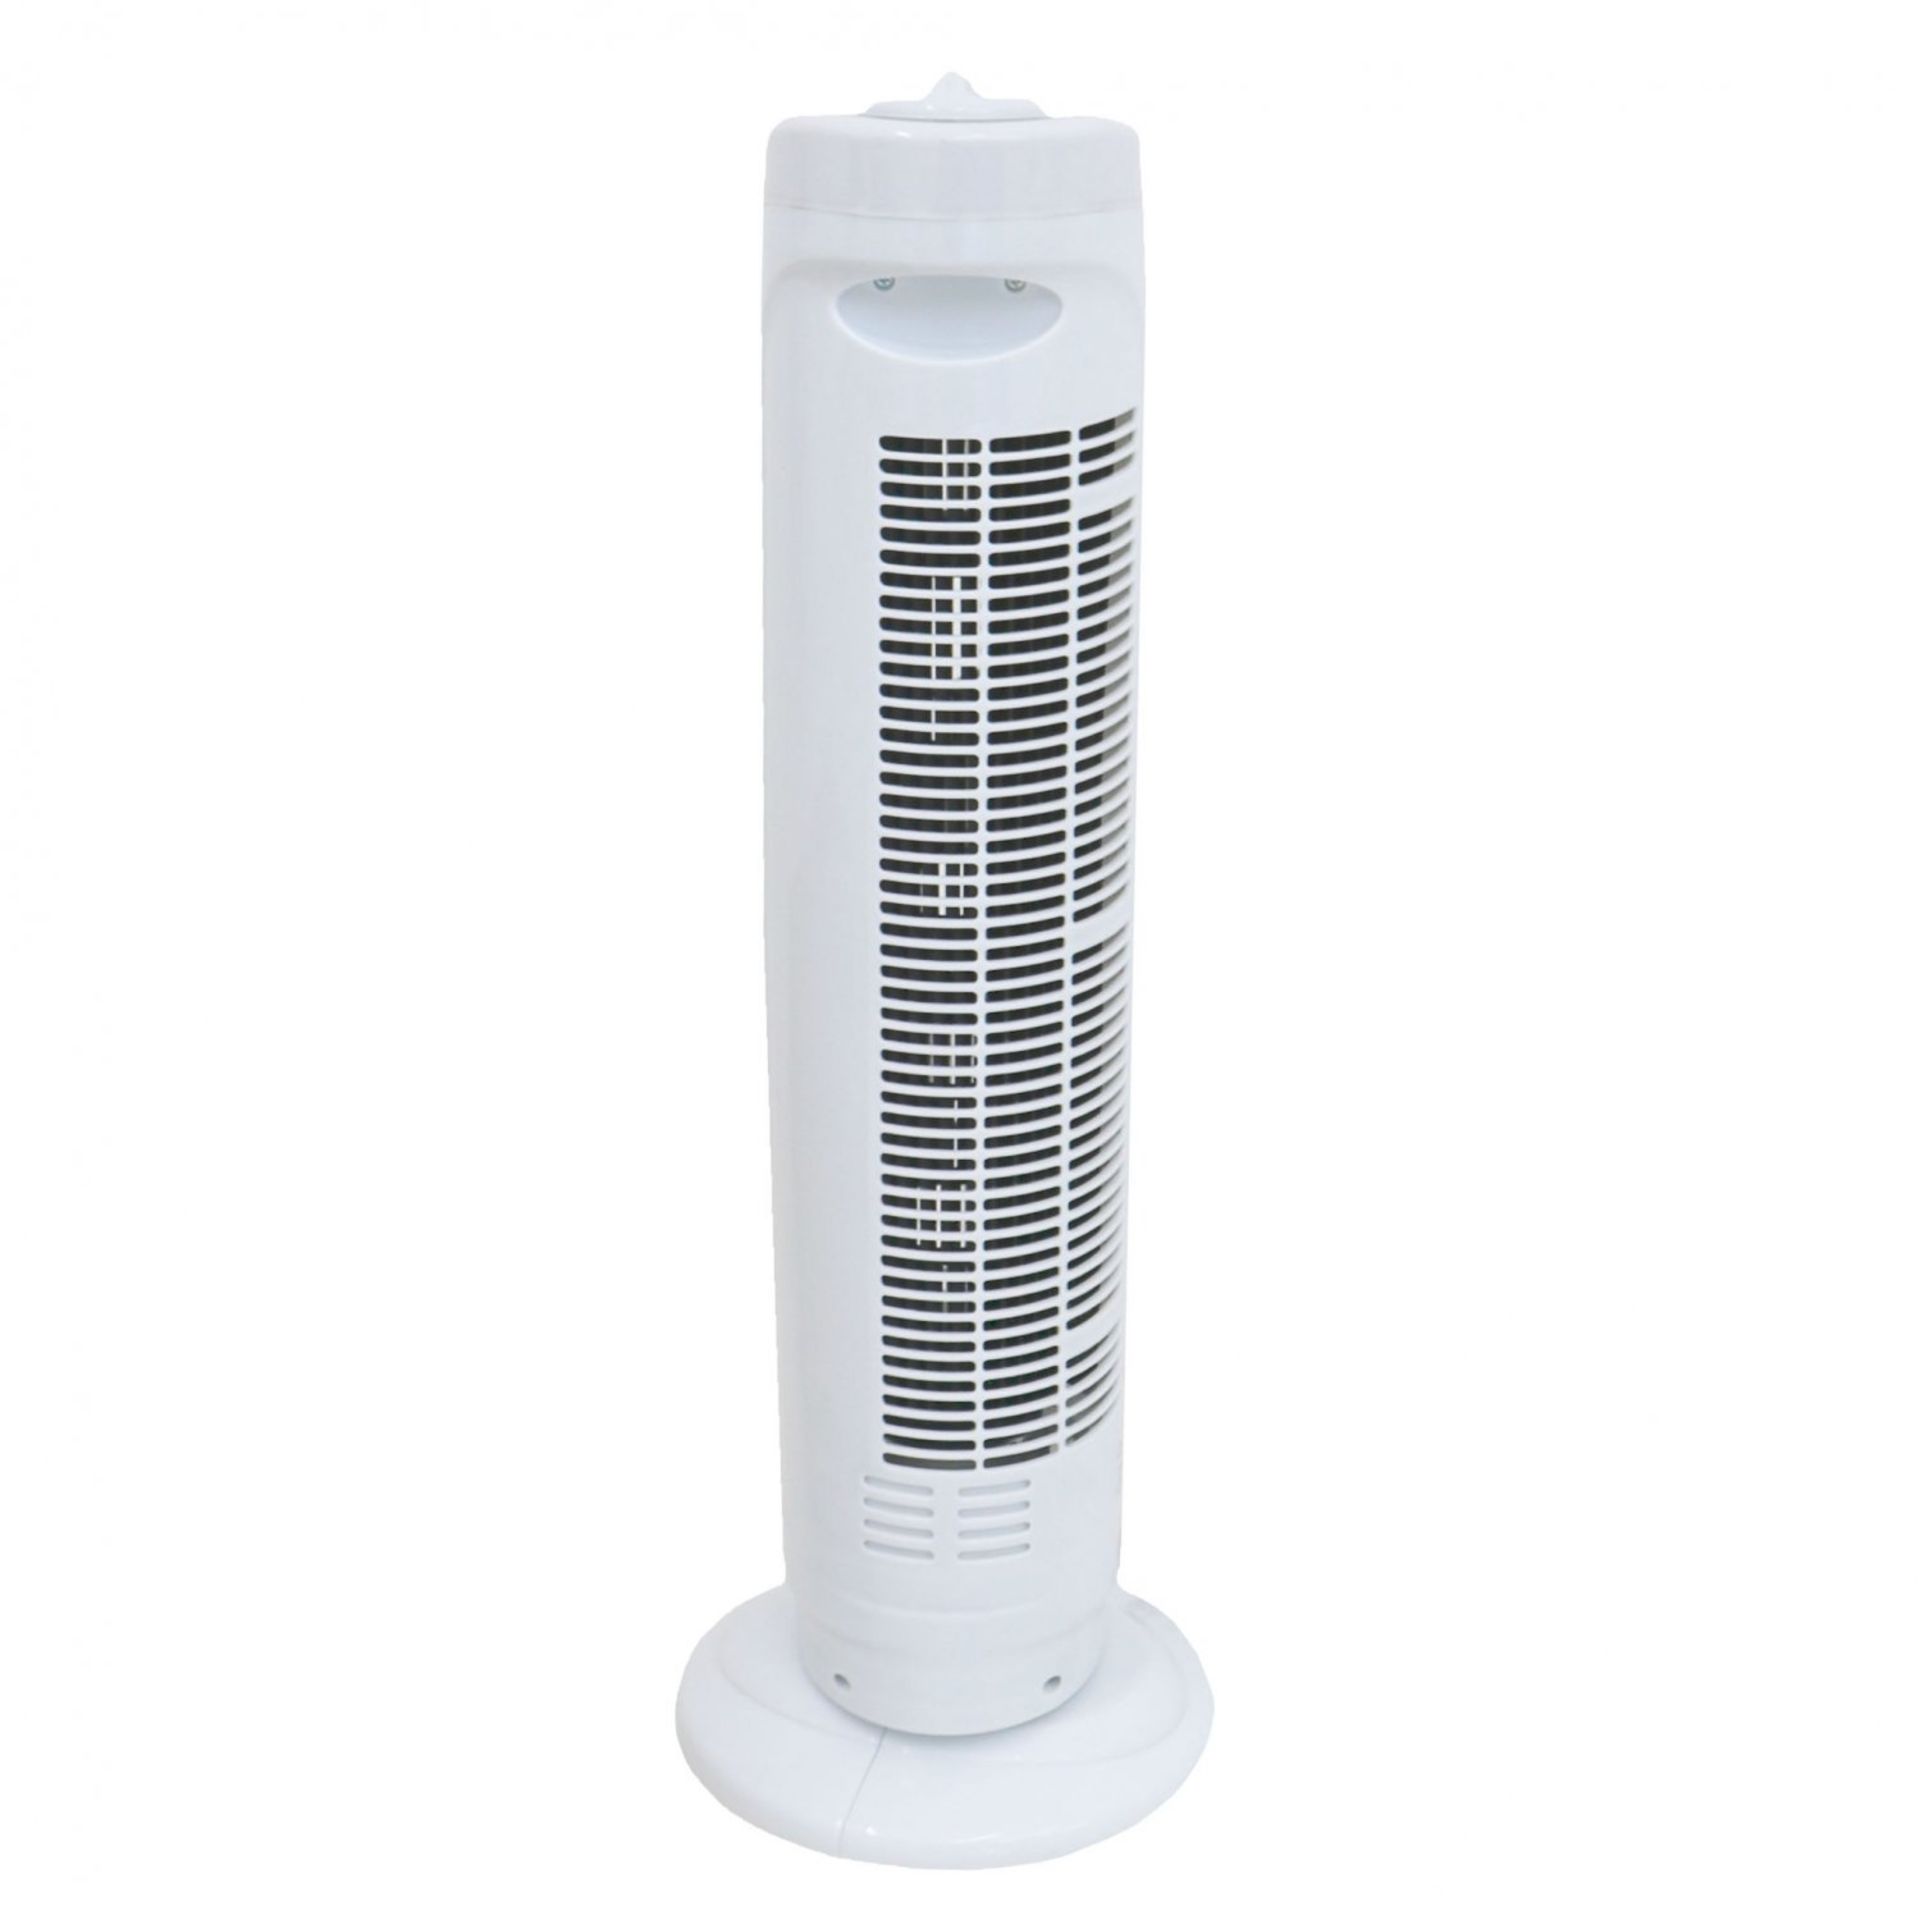 (RL98) 30" Free Standing 3-Speed Oscillating Tower Cooling Fan Stay cool this year with the ... - Image 2 of 2